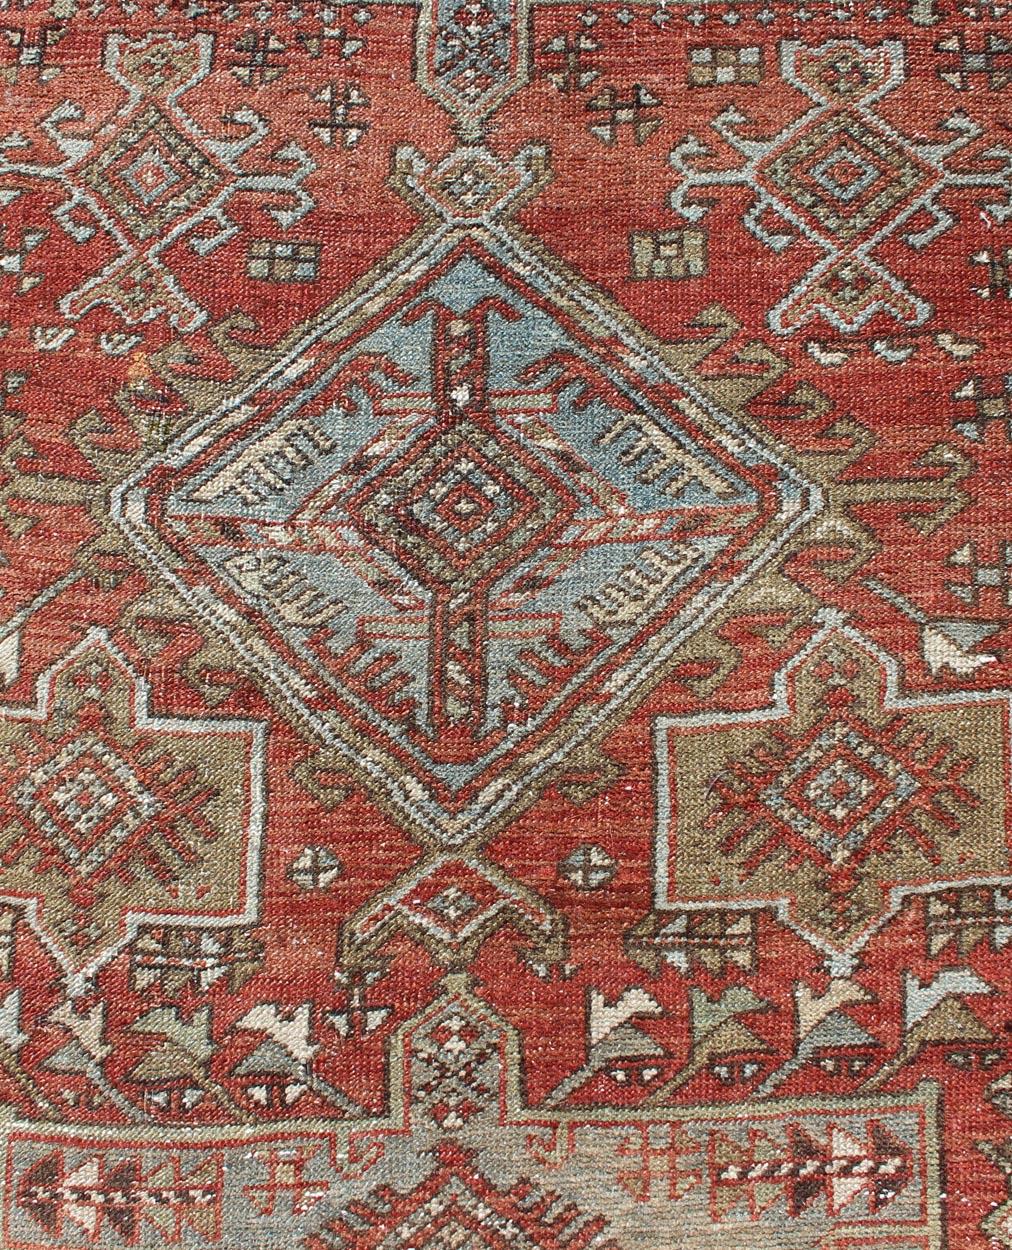 Wool Red and Light Blue-Gray Toned Antique Persian Heriz Gallery Rug with Medallions For Sale